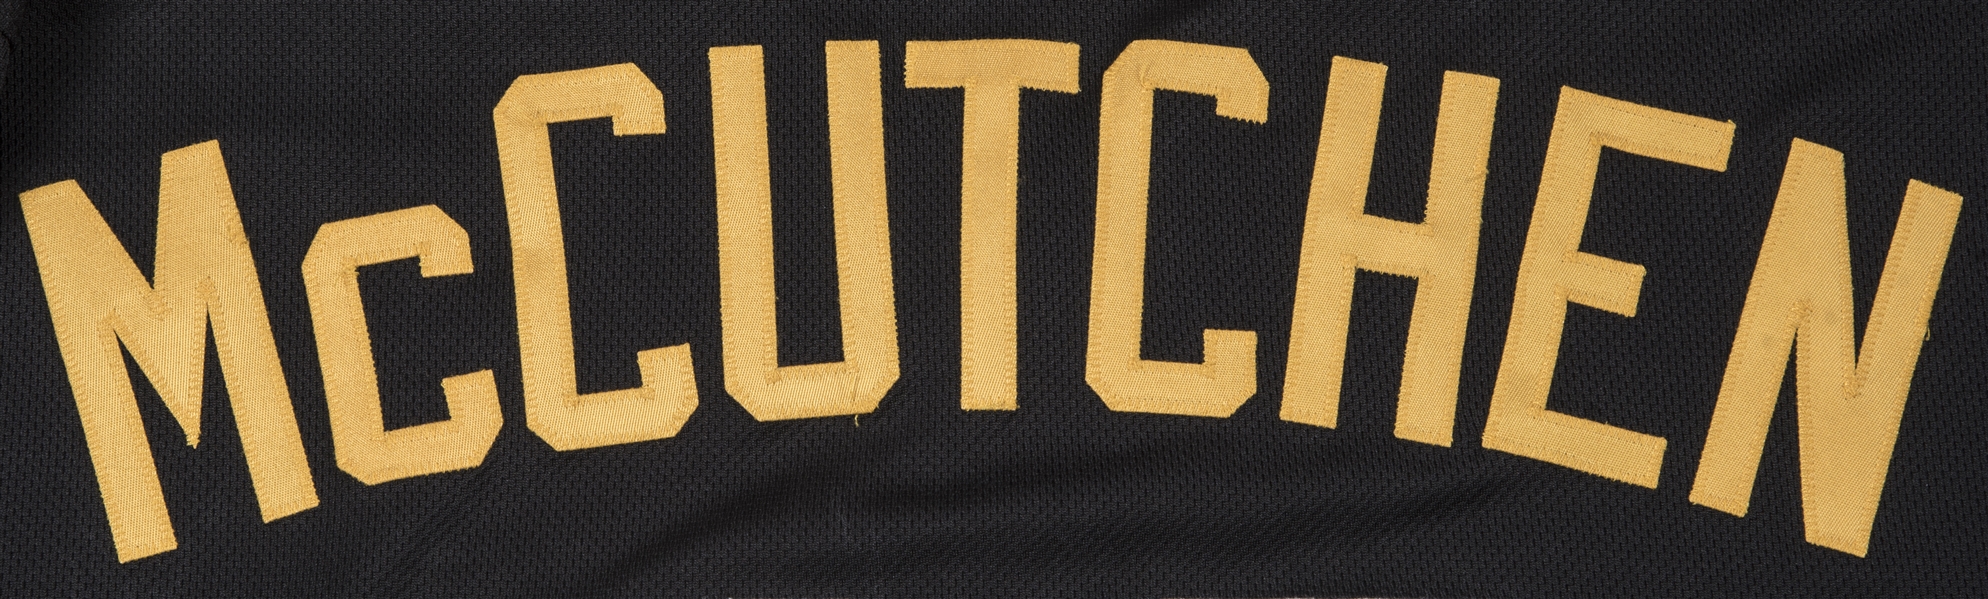 2016 Andrew McCutchen Game-Used Away Jersey